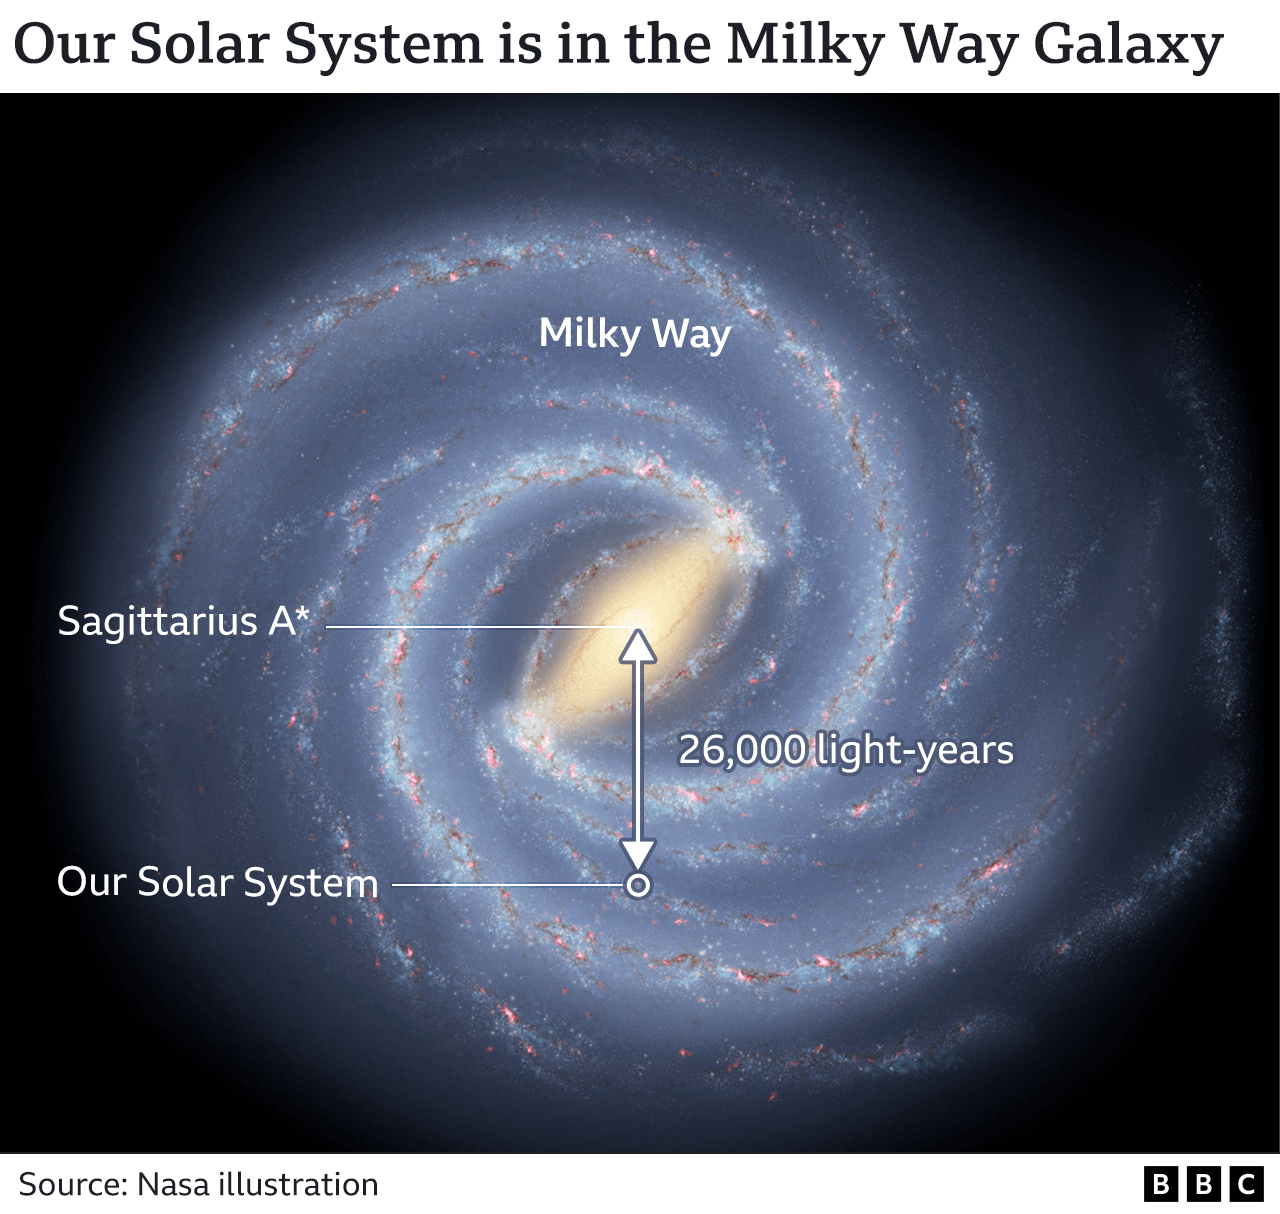 maps of black holes in the milky way